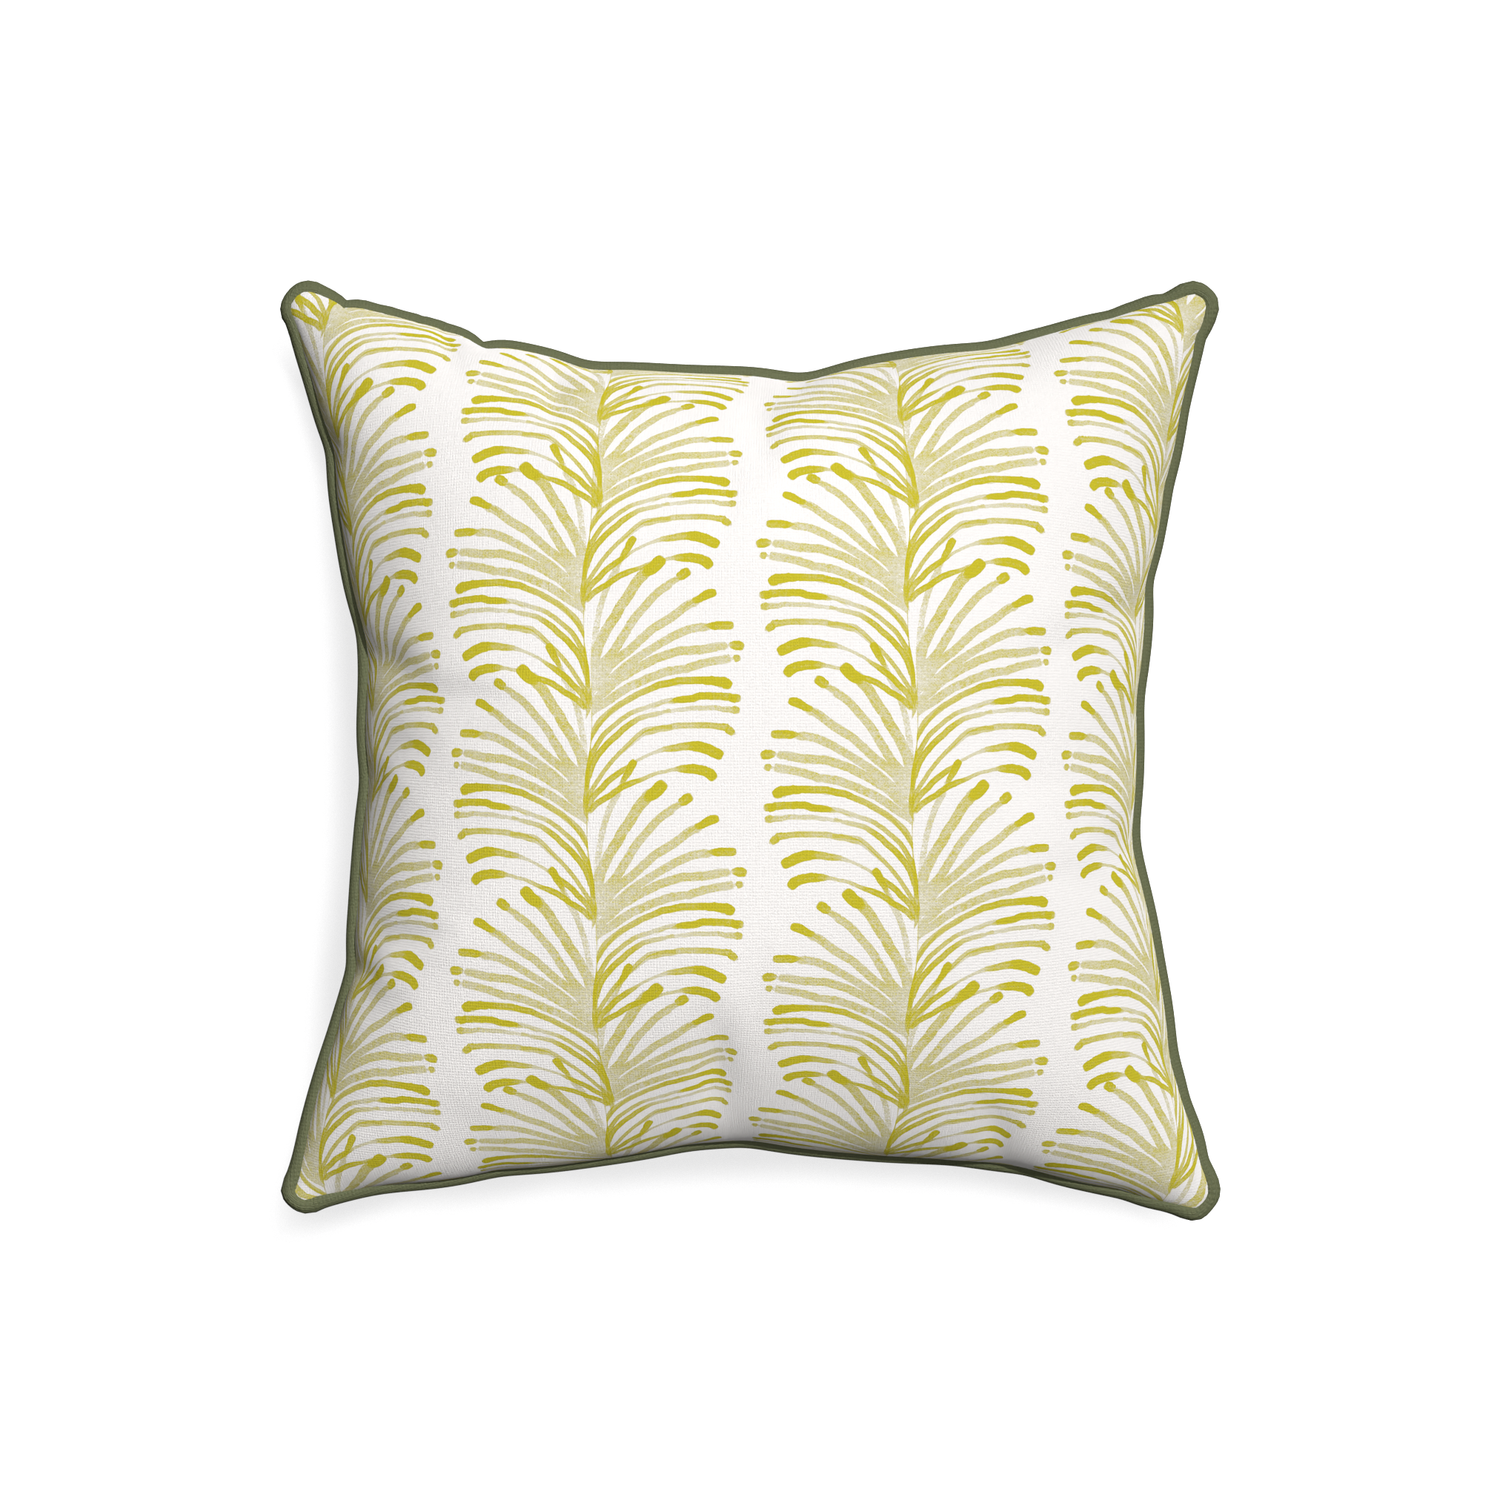 20-square emma chartreuse custom pillow with f piping on white background